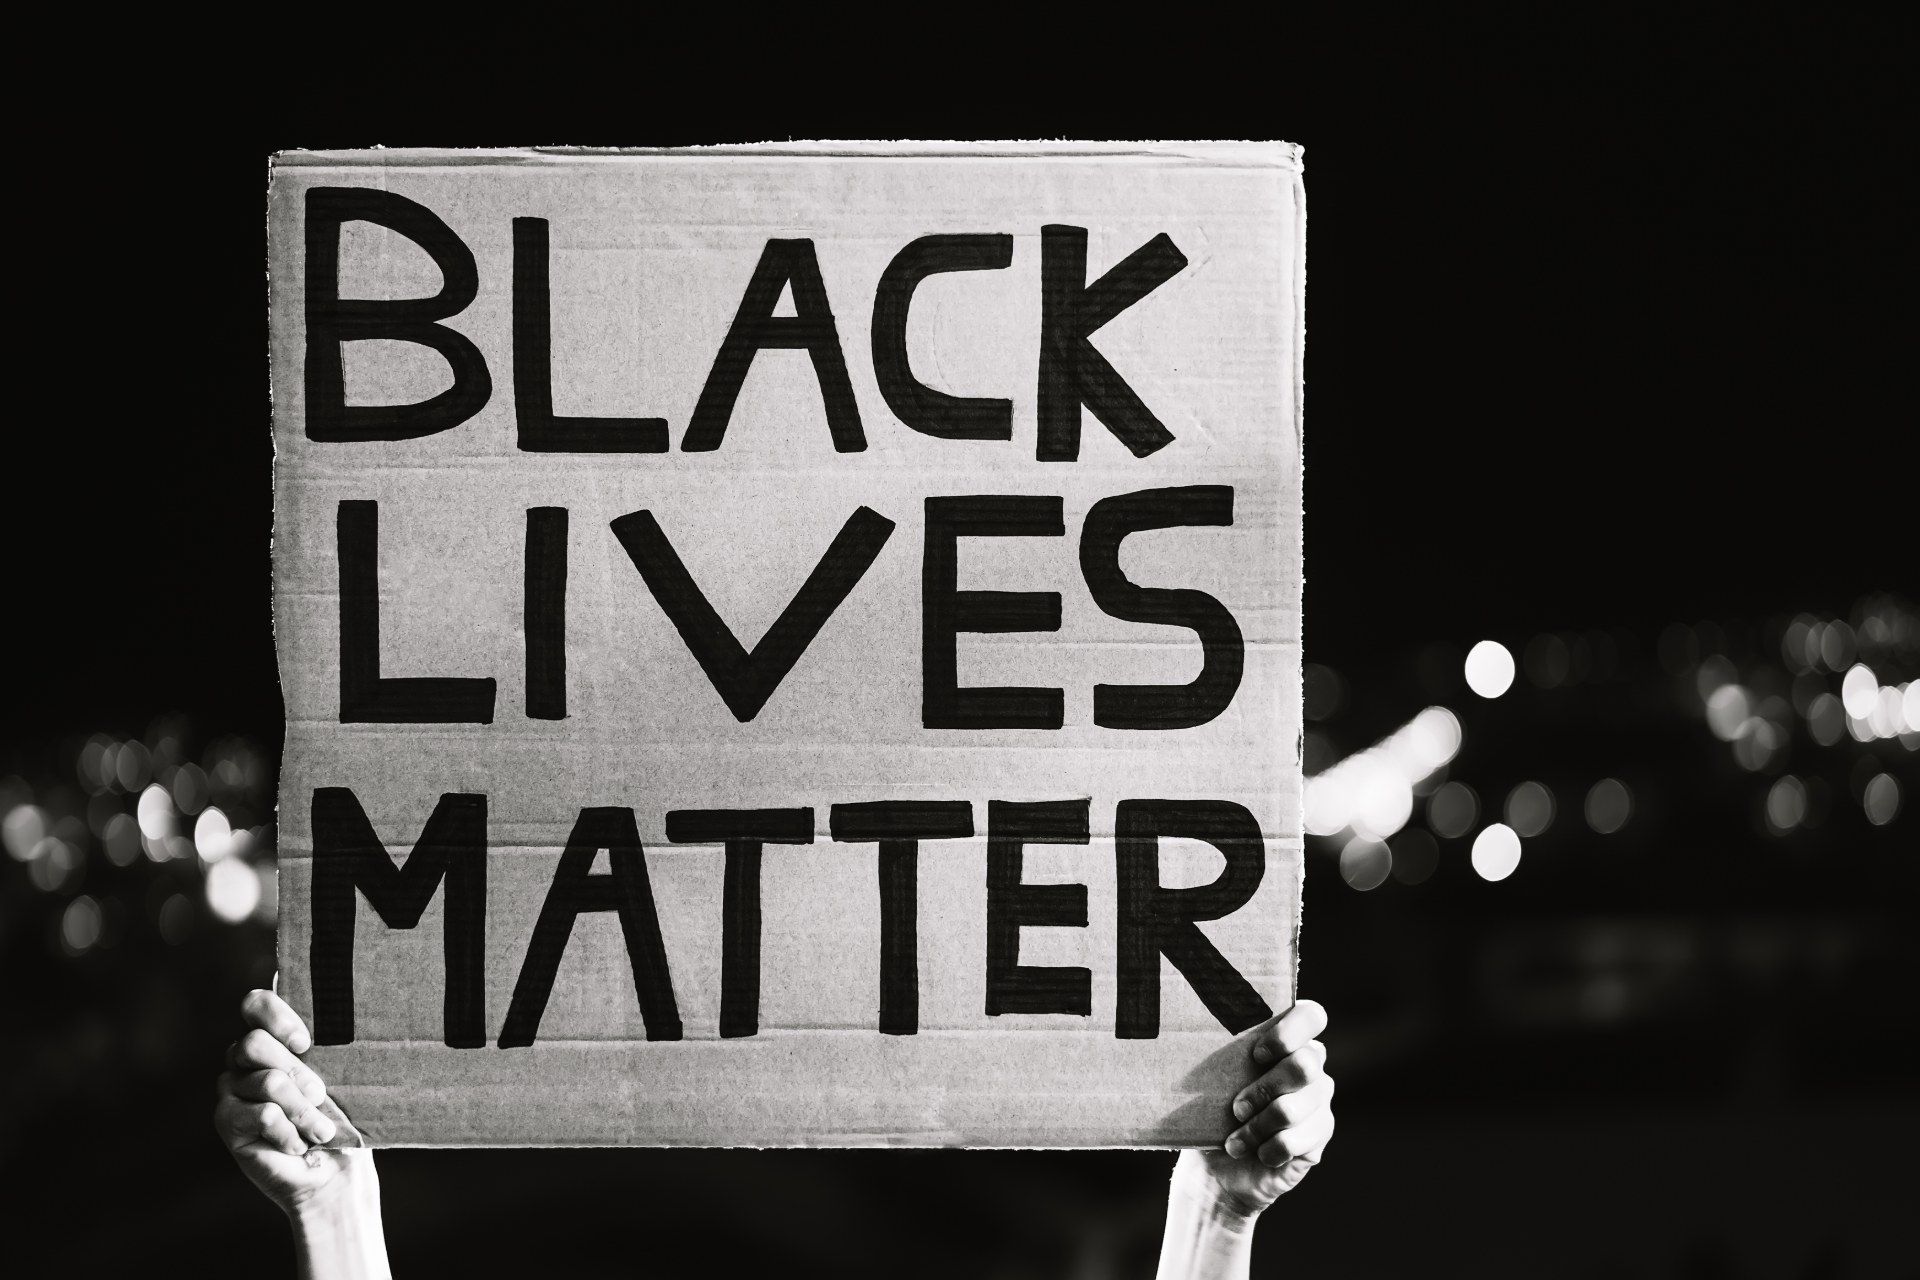 Person holds up a handmade Black Lives Matter sign during a protest